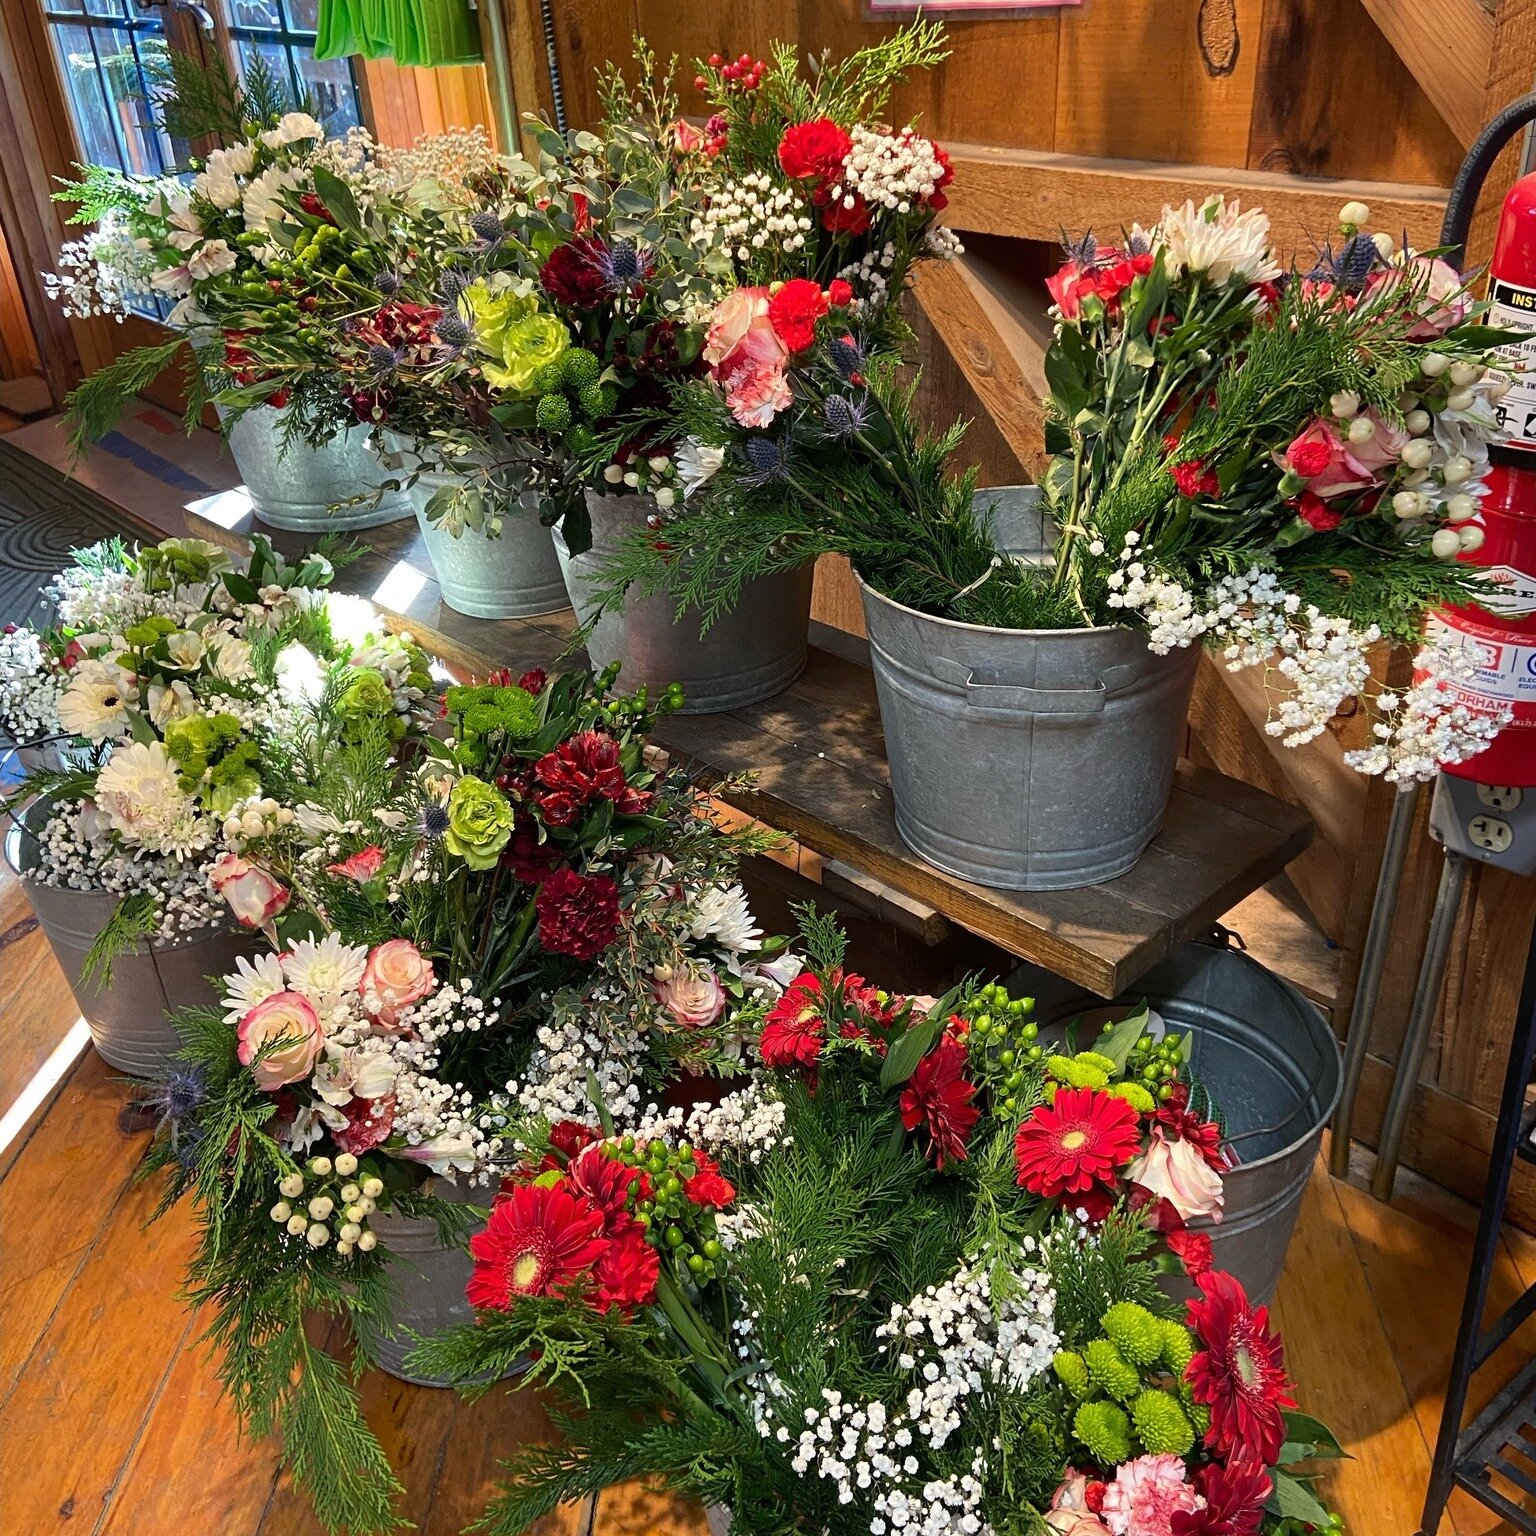 Find festive flower bouquets and other great hostess gifts for the holidays in our market this weekend! We'll be open on Saturday from 9am to 6pm and on Sunday from 9am to 5pm.